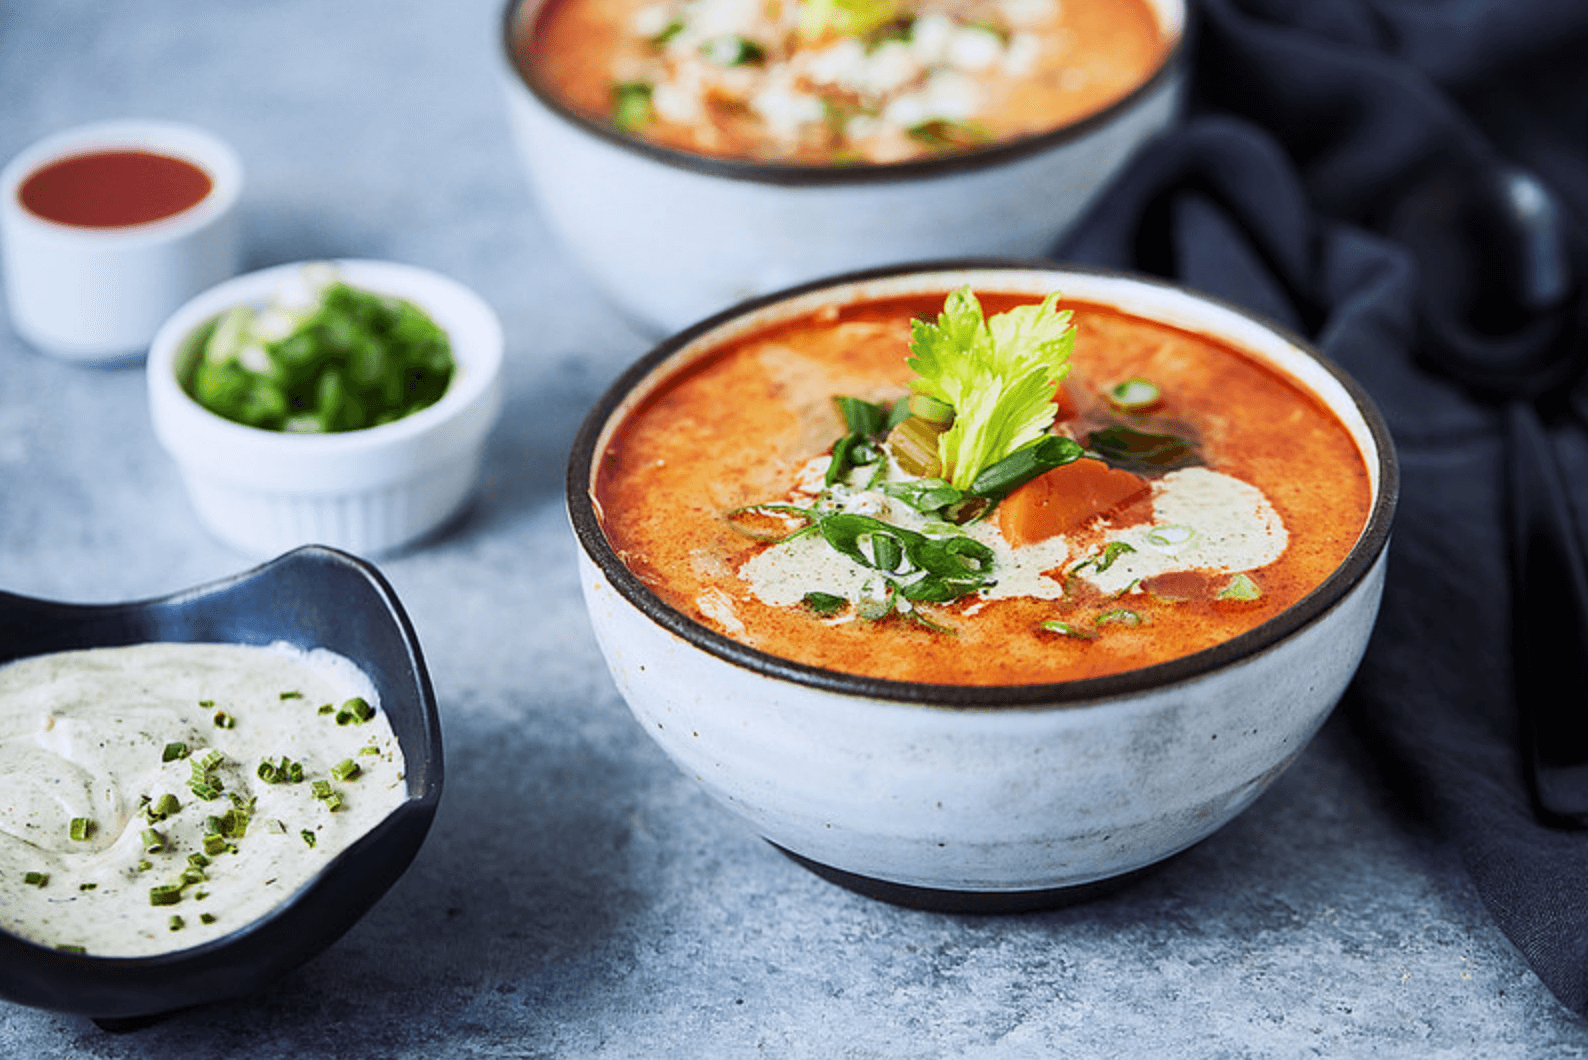 30 Easy Whole30 Soup Recipes | IP Buffalo chicken soup- tasty yummies